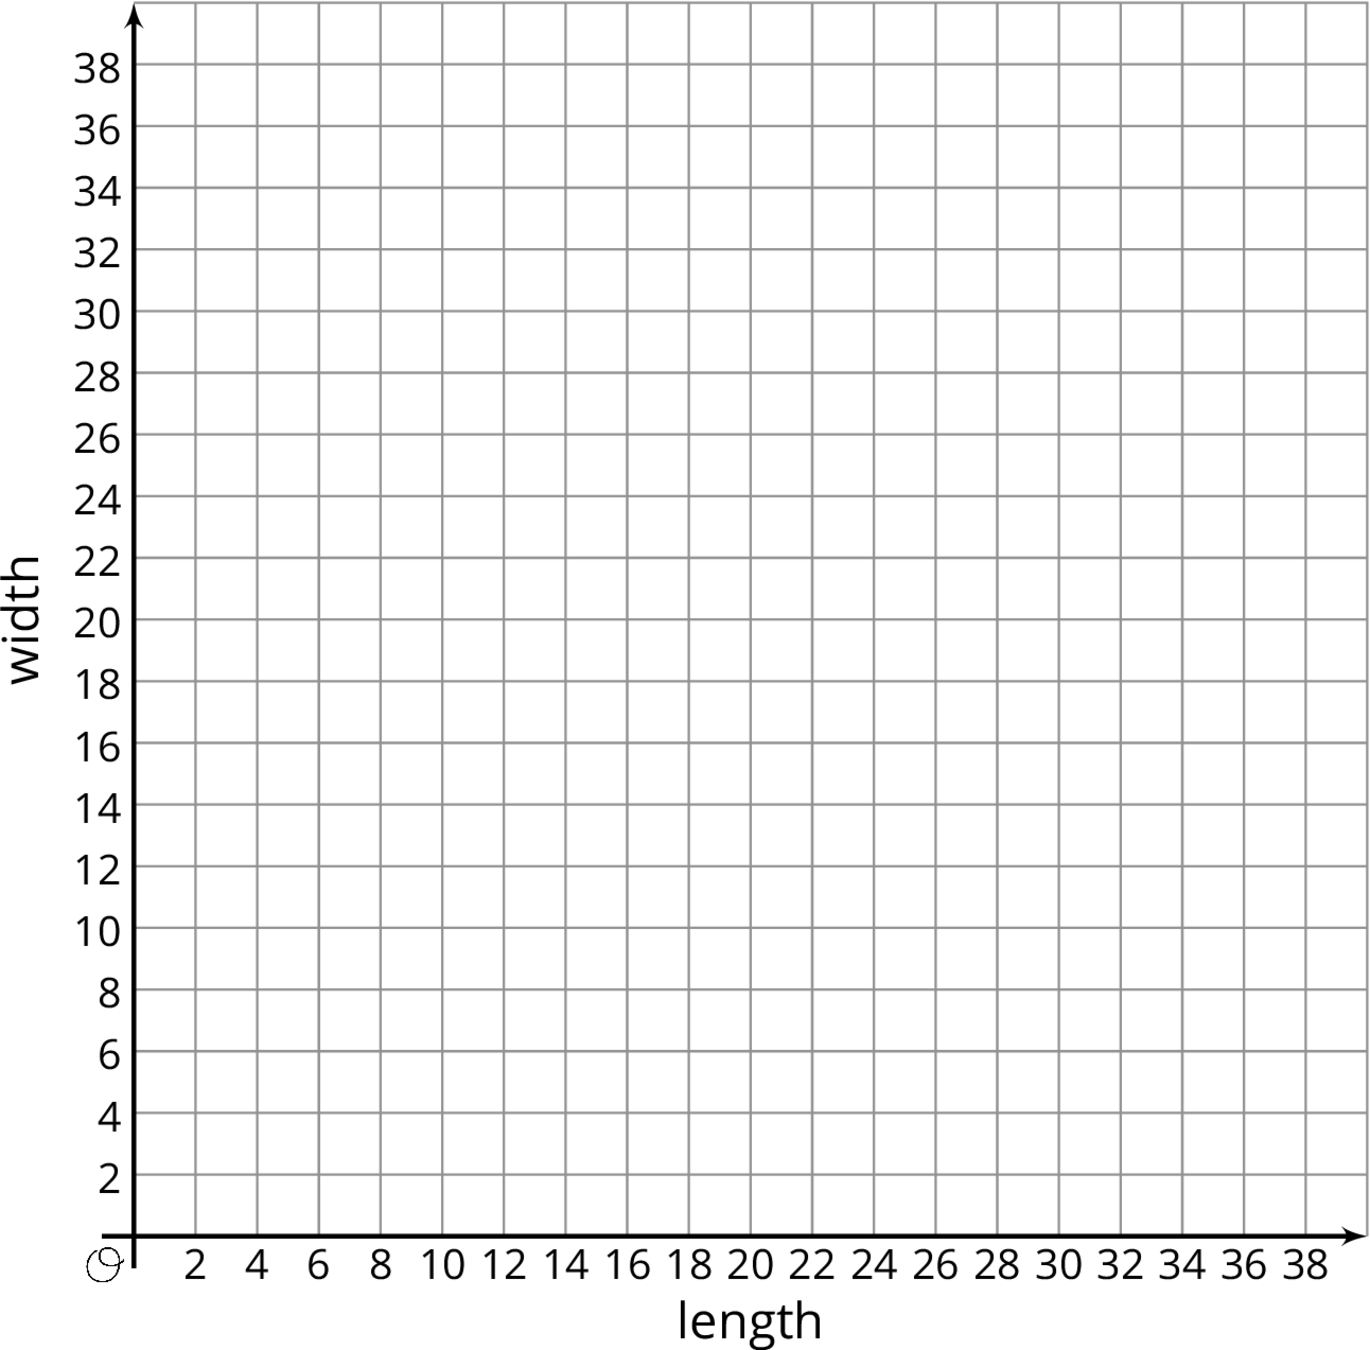 A blank coordinate plane with the origin labeled "O". The horizontal axis is labeled "length", and the vertical axis is labeled "width". For both axes, the numbers 0 through 38, in increments of 2, are indicated.